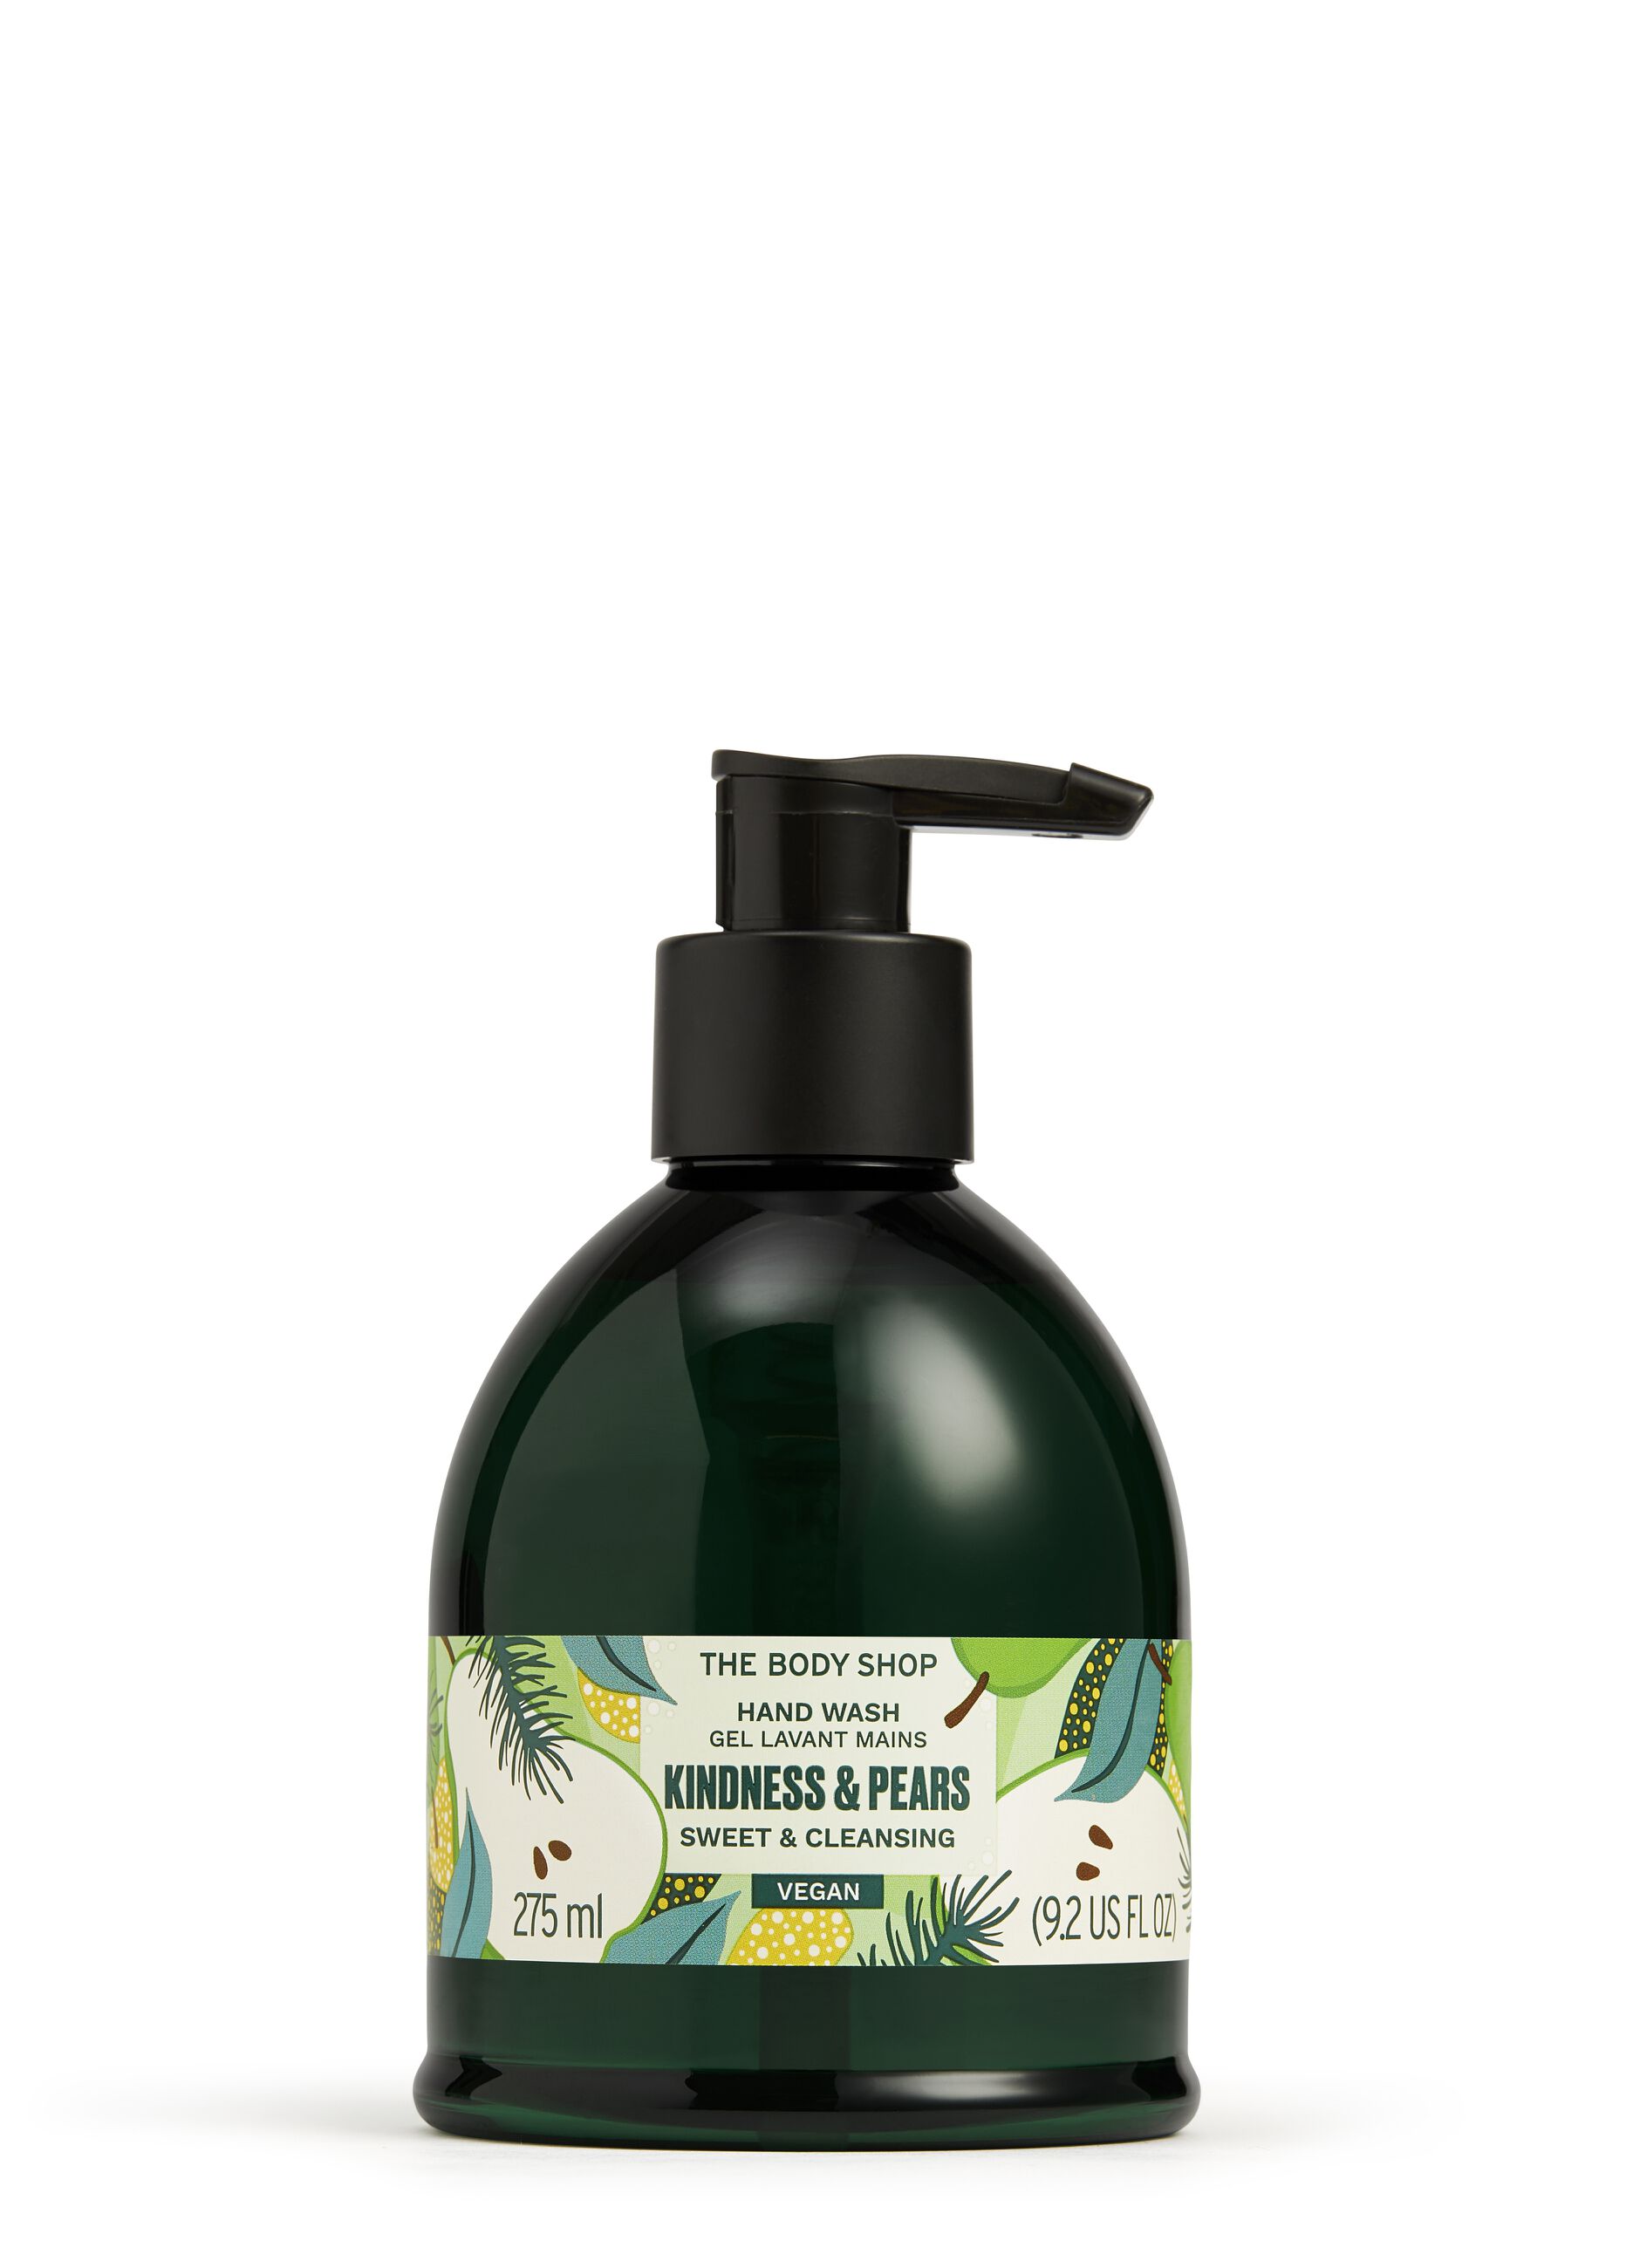 Detergente mani Kindness & Pears 275ml The Body Shop